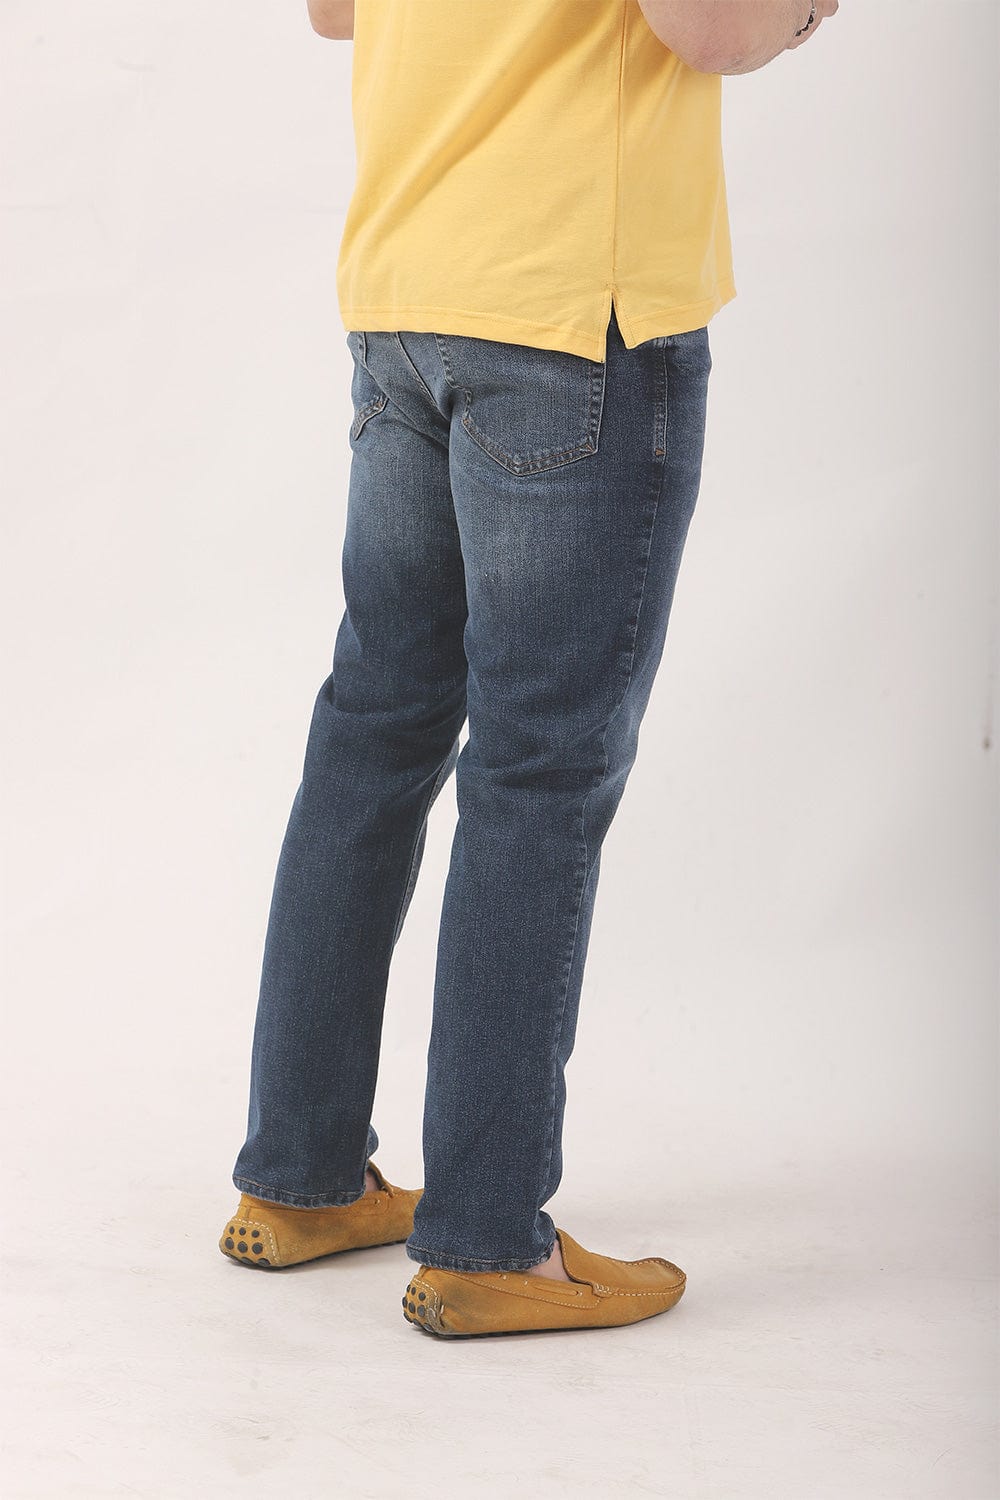 Hope Not Out by Shahid Afridi Men Jeans Slim Straight Fit Stretch Denim